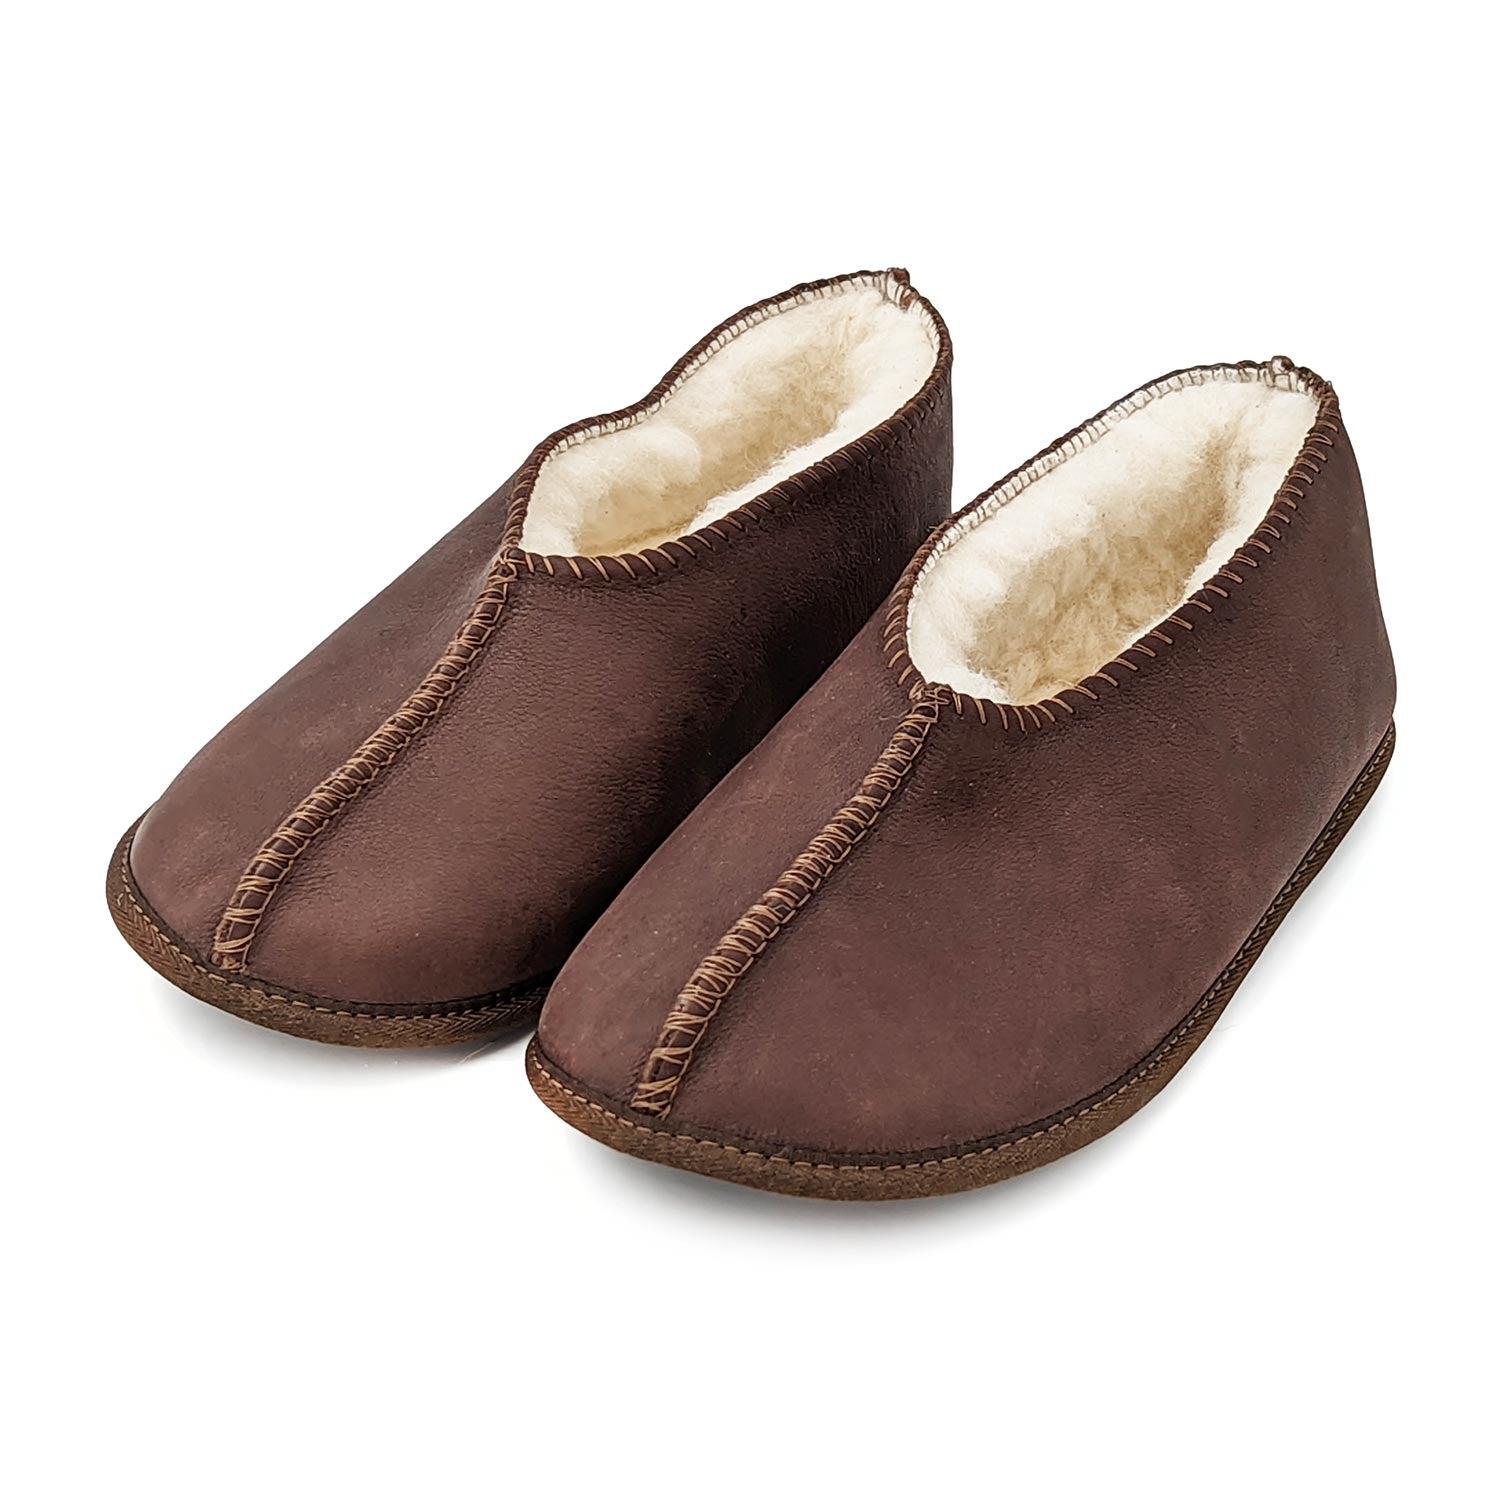 Karu Shloffy Choc Brown Leather & Wool Soft-Sole Slippers | Made by ...